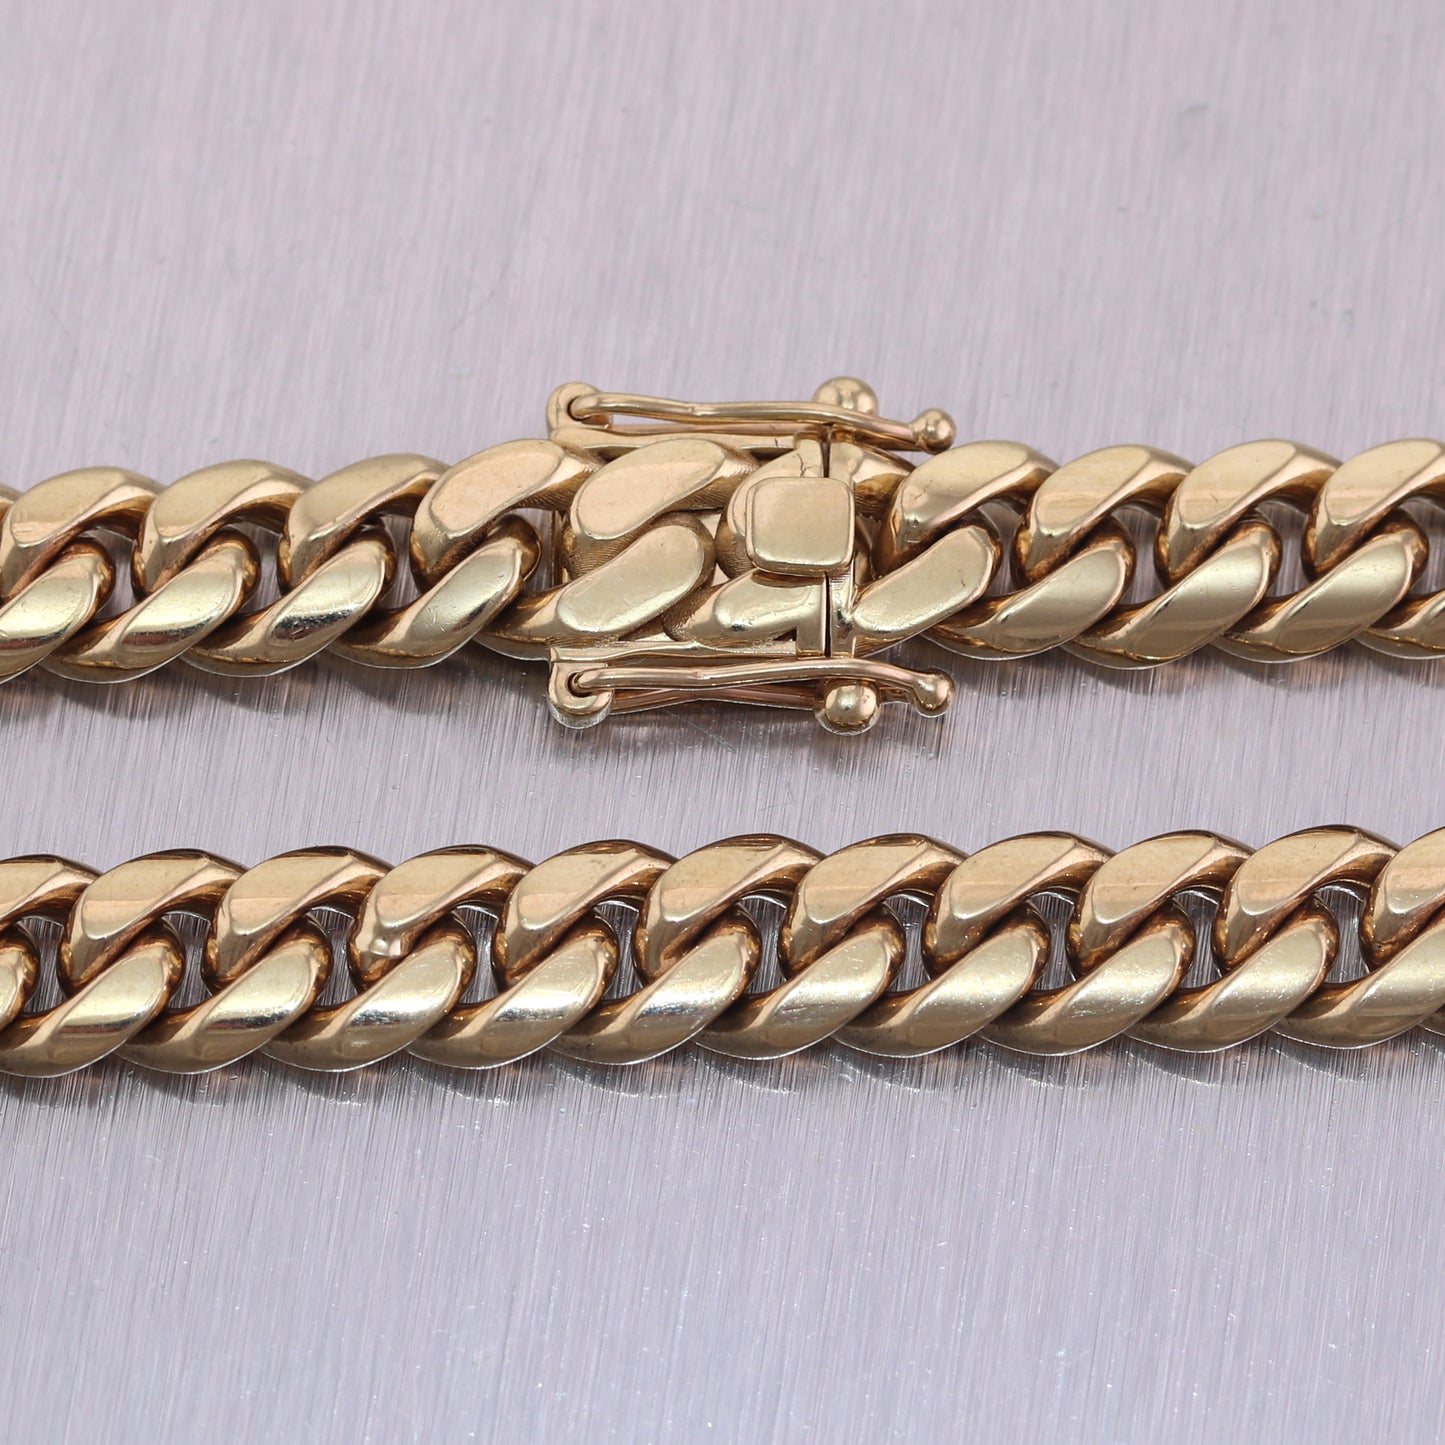 157g 14k Yellow Gold Cuban Link Chain 24" Necklace